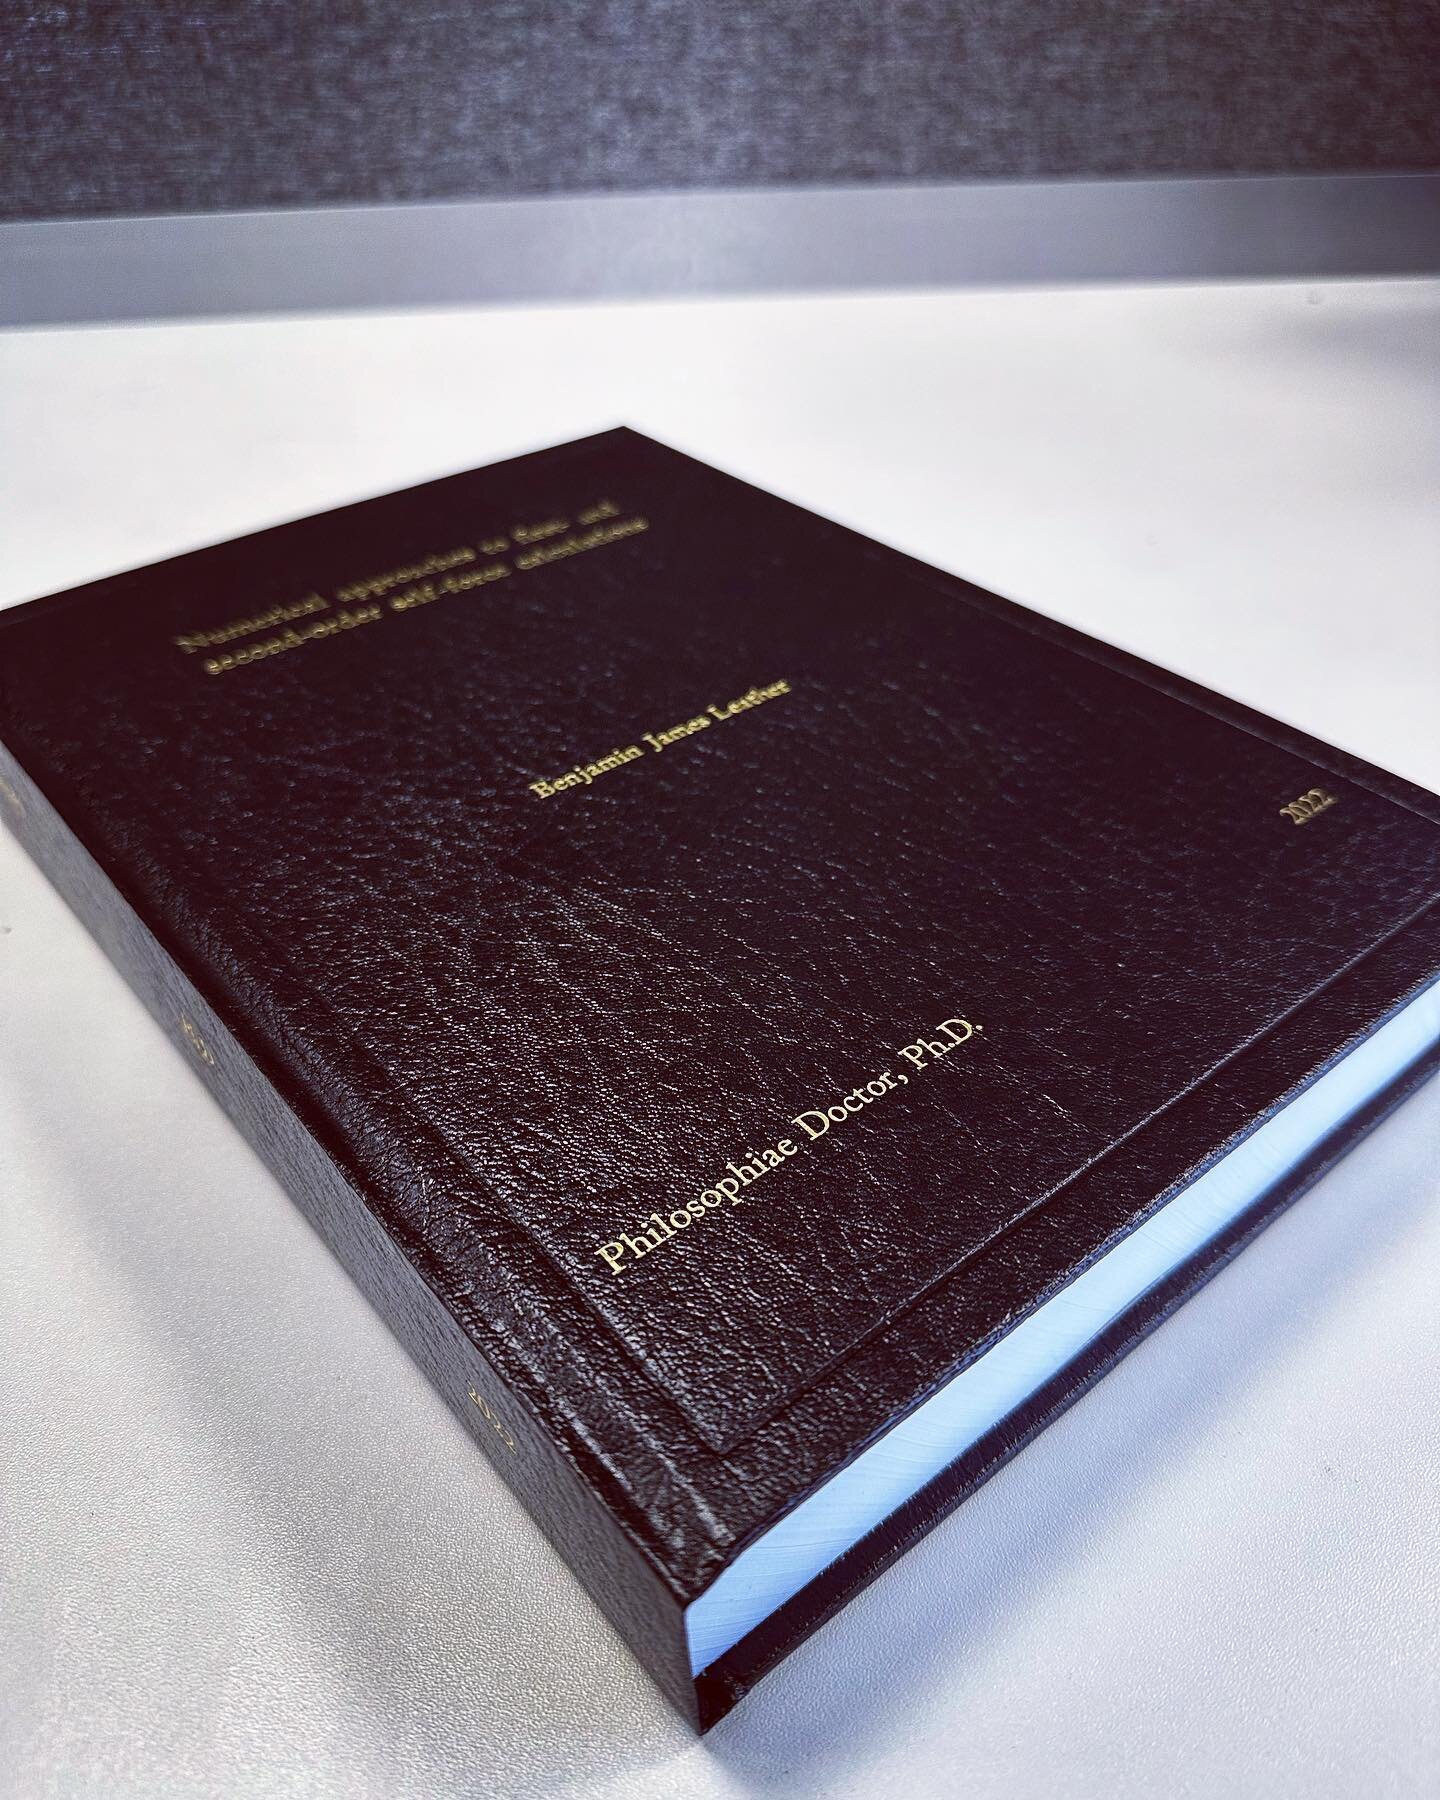 Finally, have a hard copy of my thesis. 

4 years and many hundreds of pages later&hellip;

#academia #physics #phd #phdlife #phdjourney #academic #paper #research #ucd #gravity #stem #maths #mathematics #education #study #school #student # college #